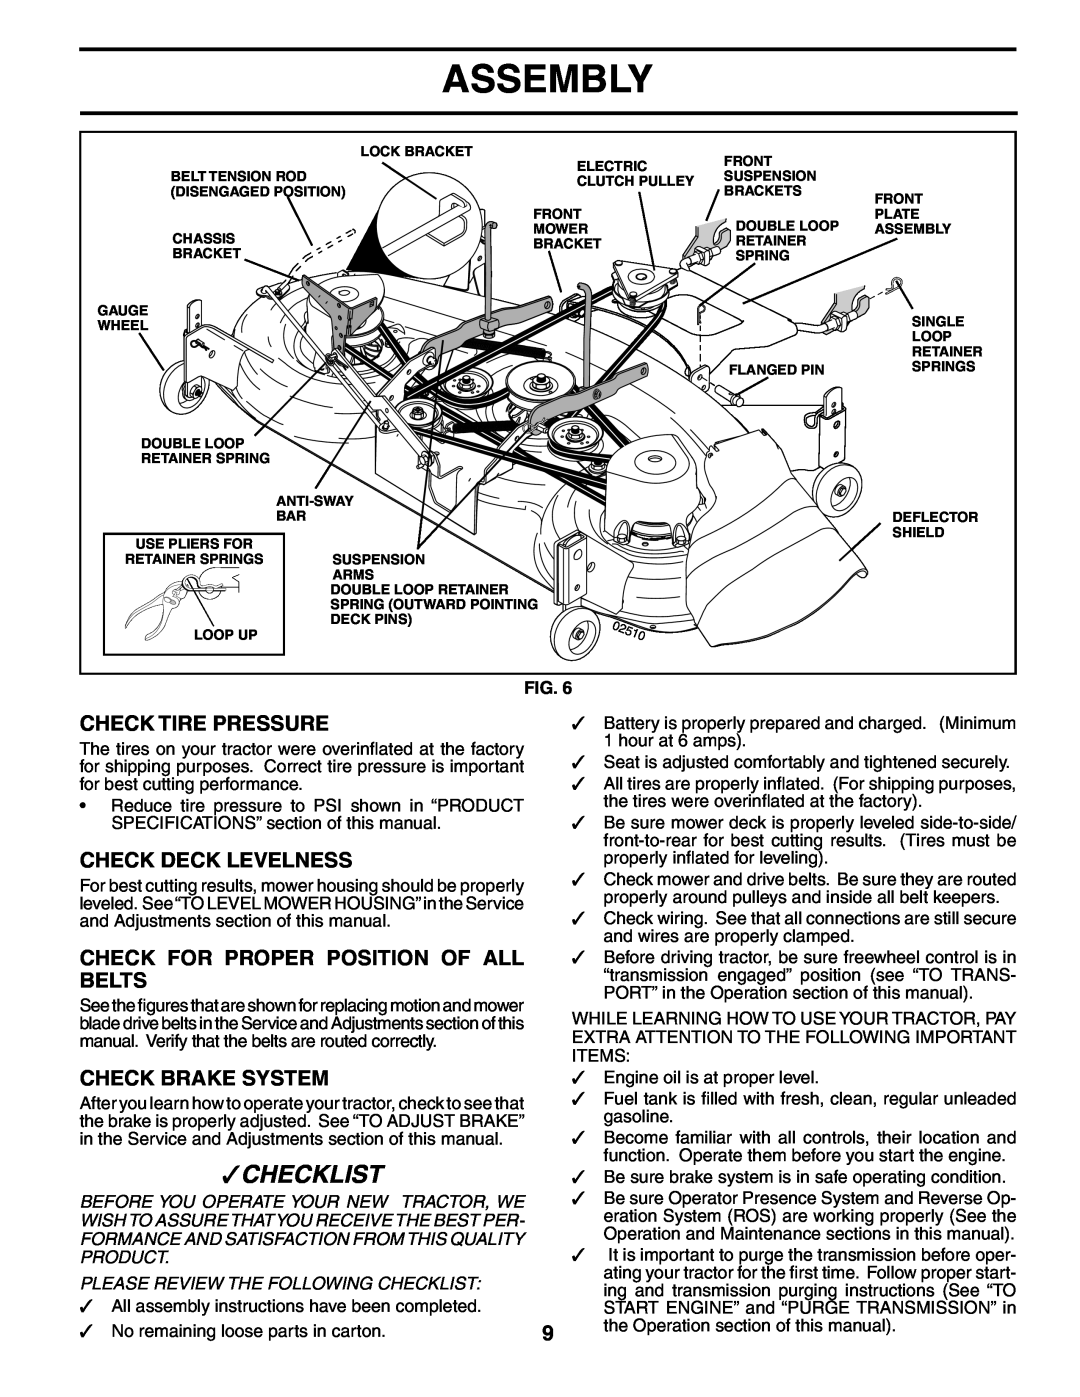 Poulan 195032 manual Check Tire Pressure, Check Deck Levelness, Check For Proper Position Of All Belts, Check Brake System 